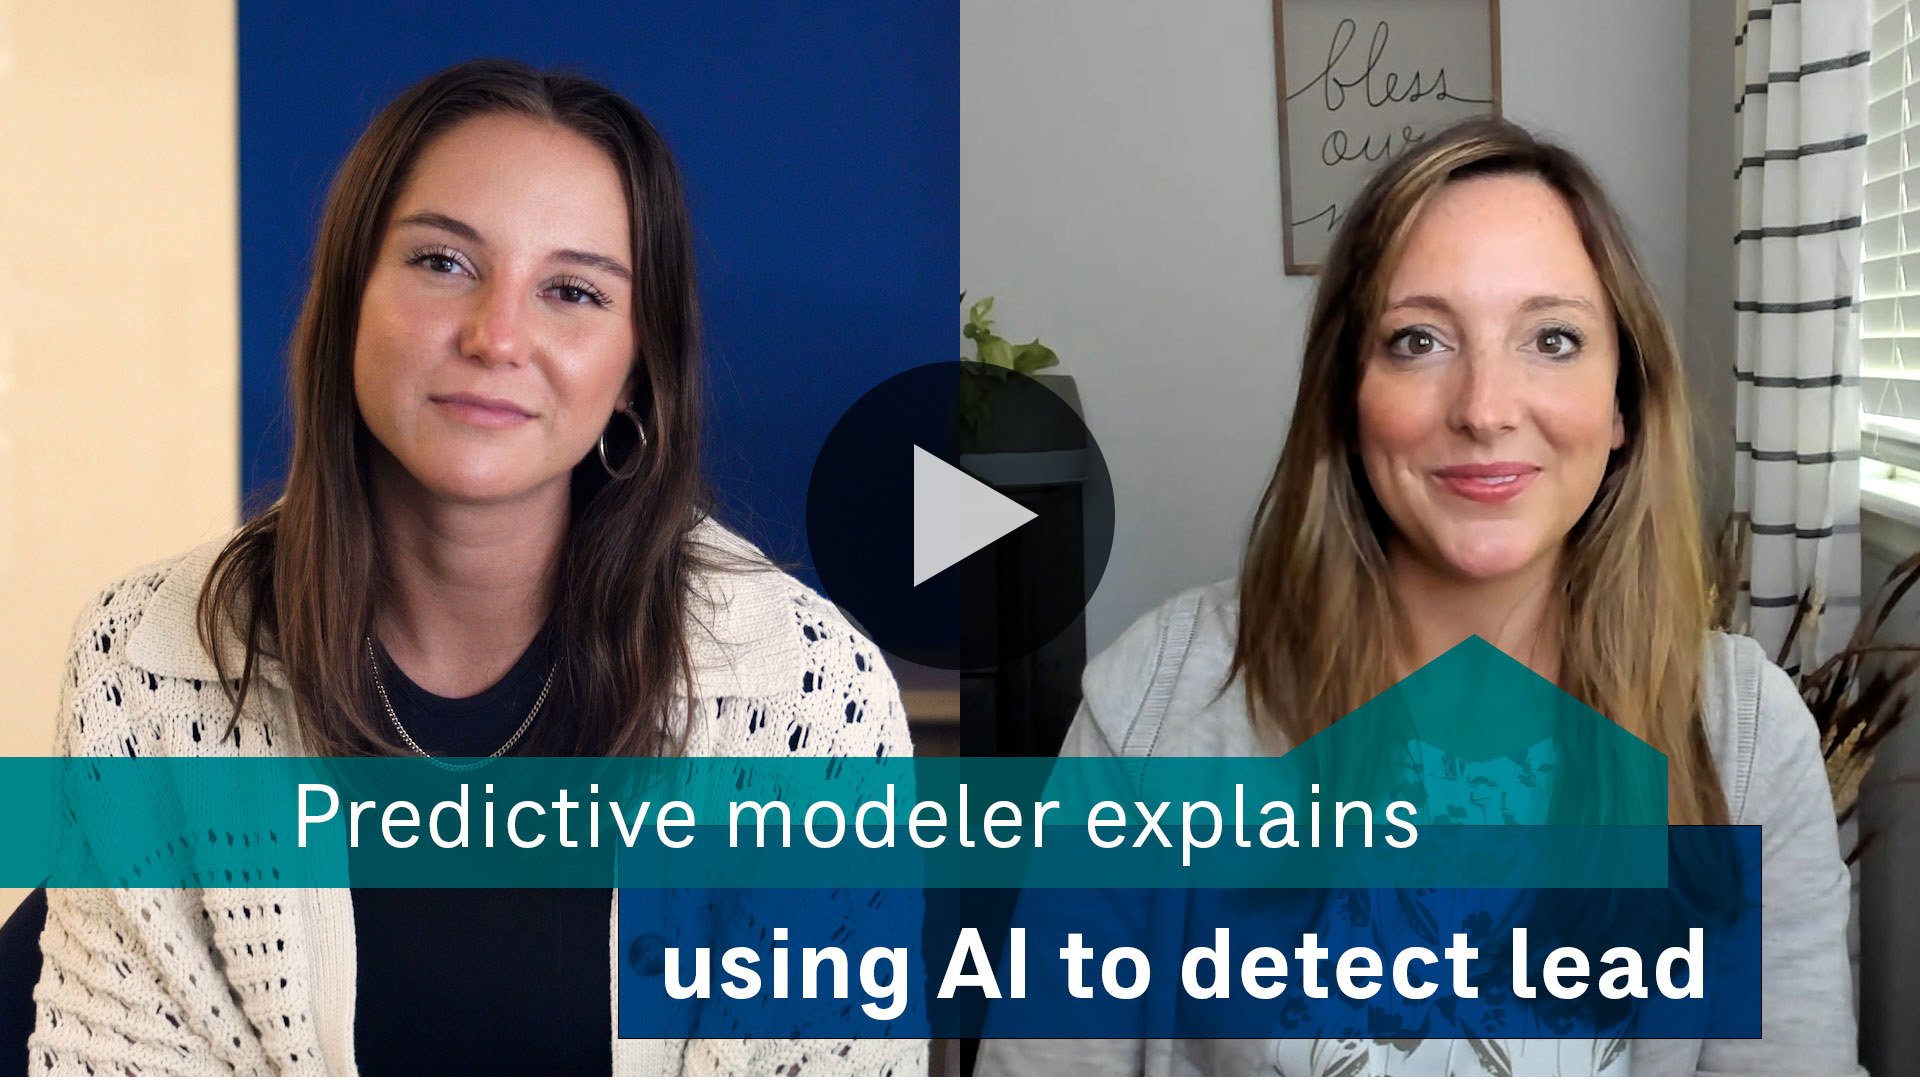 Predictive modeler Katie Deheer explains how to use AI to detect lead